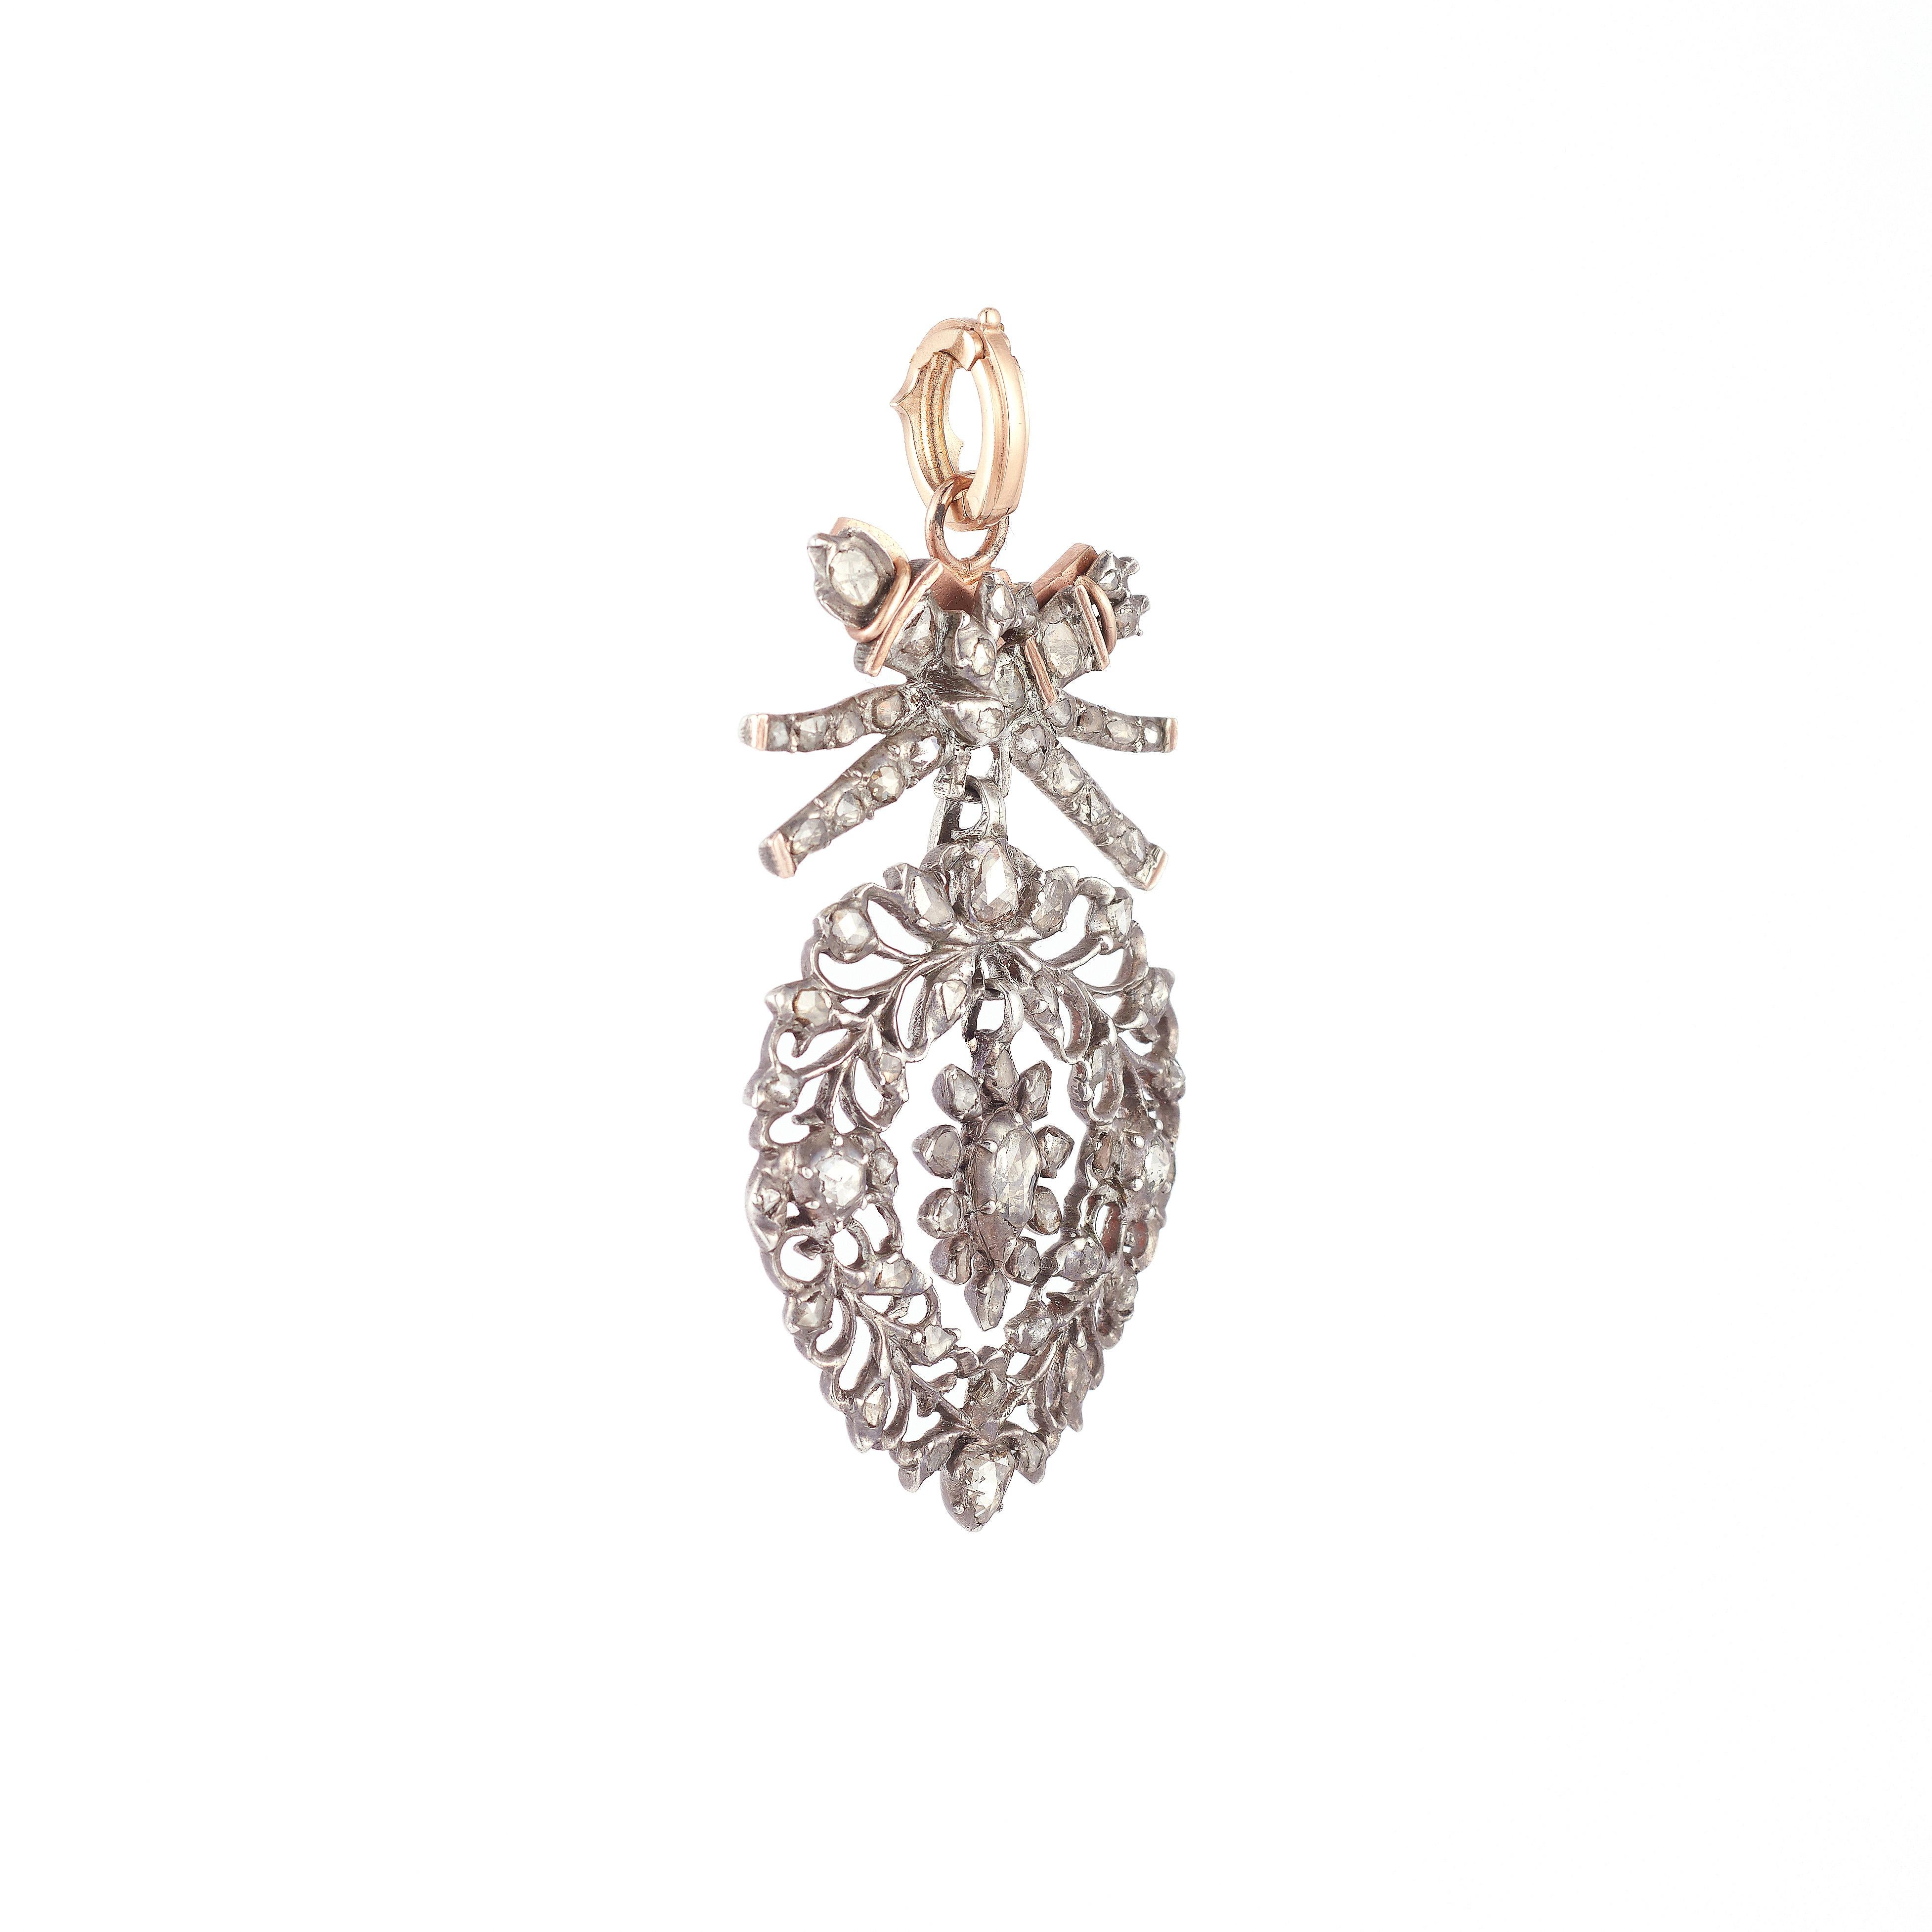 19th Century Flemish Heart Pendant (silver) with 14k rose gold mounting
Rose cut and Senaille Diamonds approx 1.00 total carats

